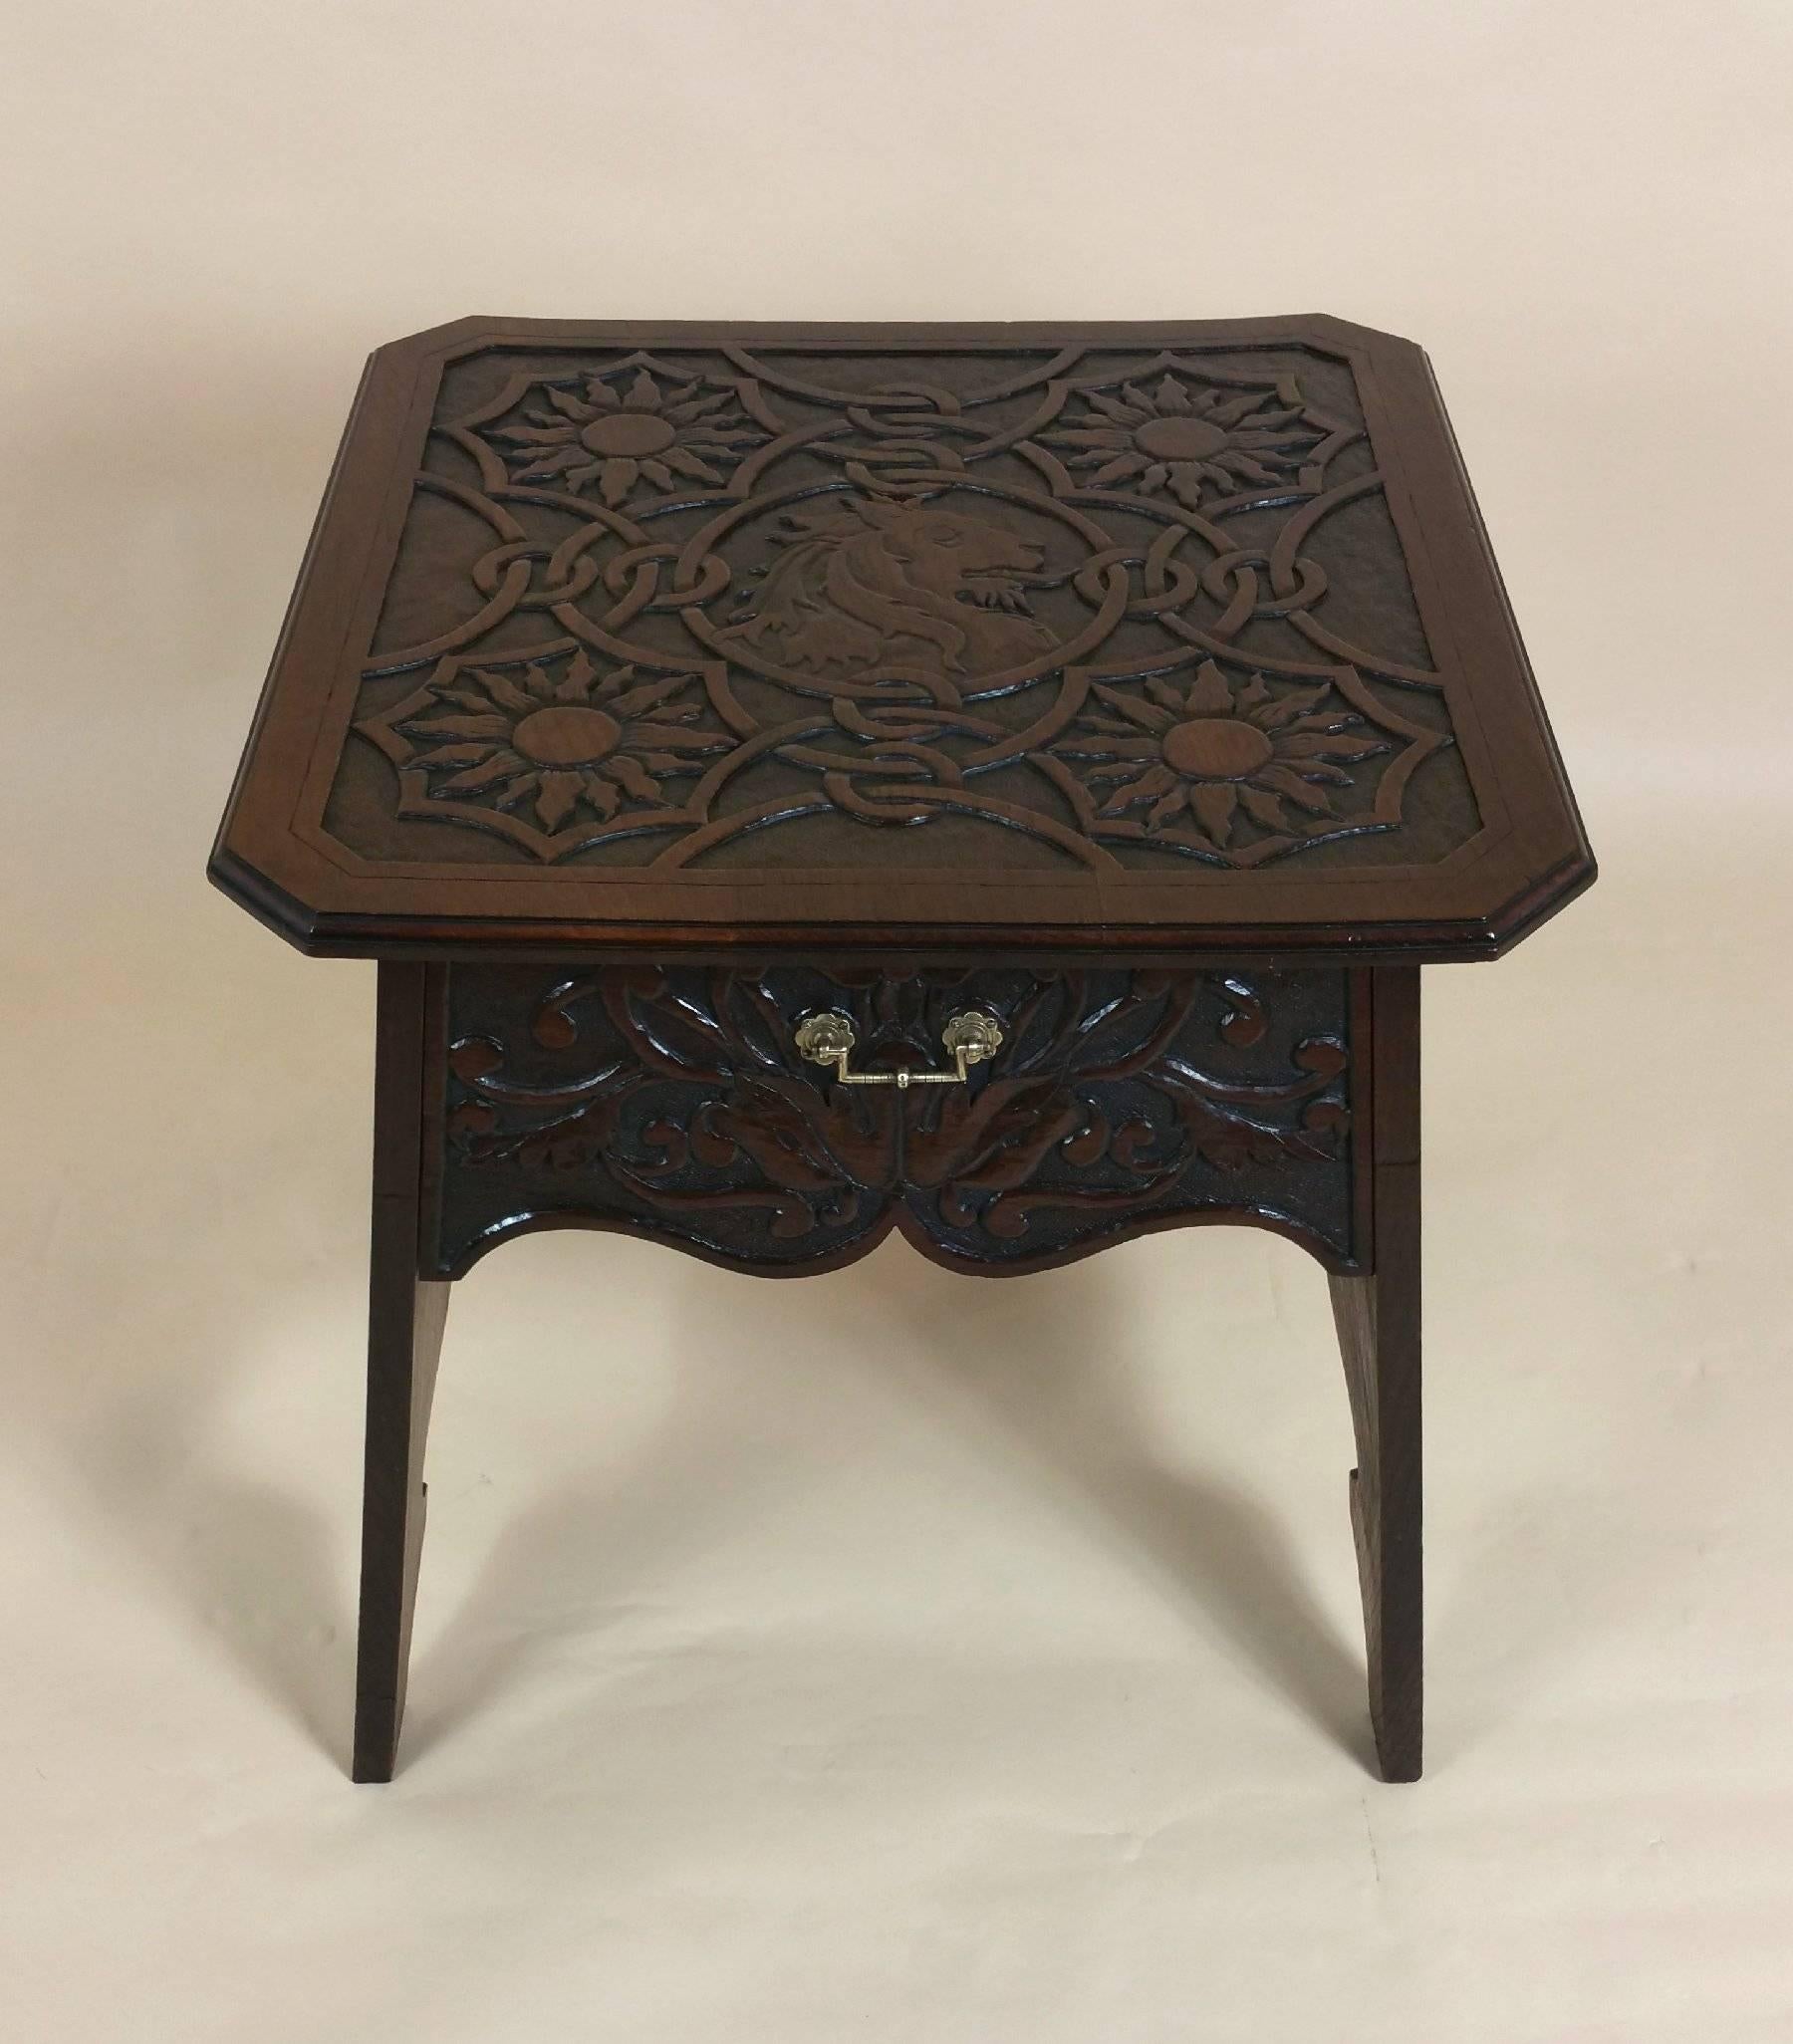 This magnificent and very handsome 19th century Arts and Crafts oak centre table features an ornate and highly detailed carving of sunflowers and Celtic strap work with a lion’s head central design. The table has one deep drawer and a stretcher